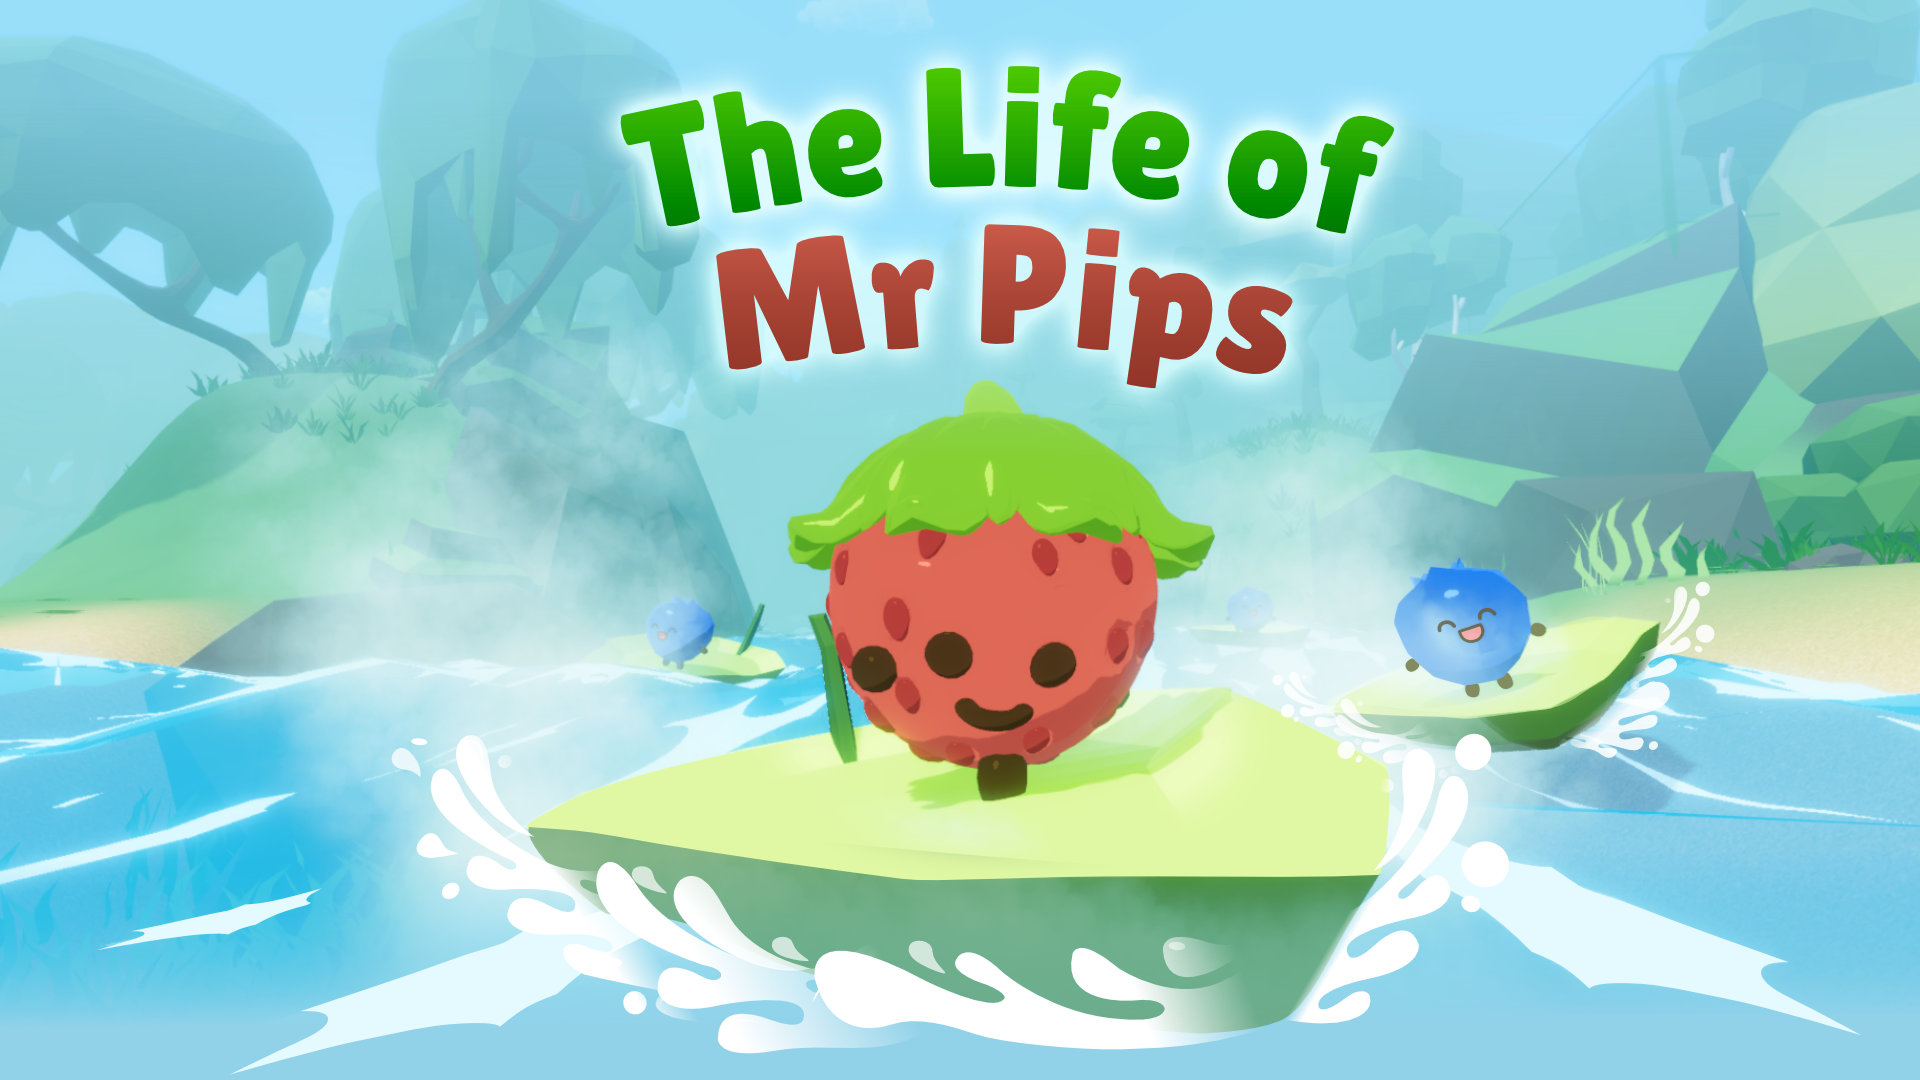 The Life of Mr Pips